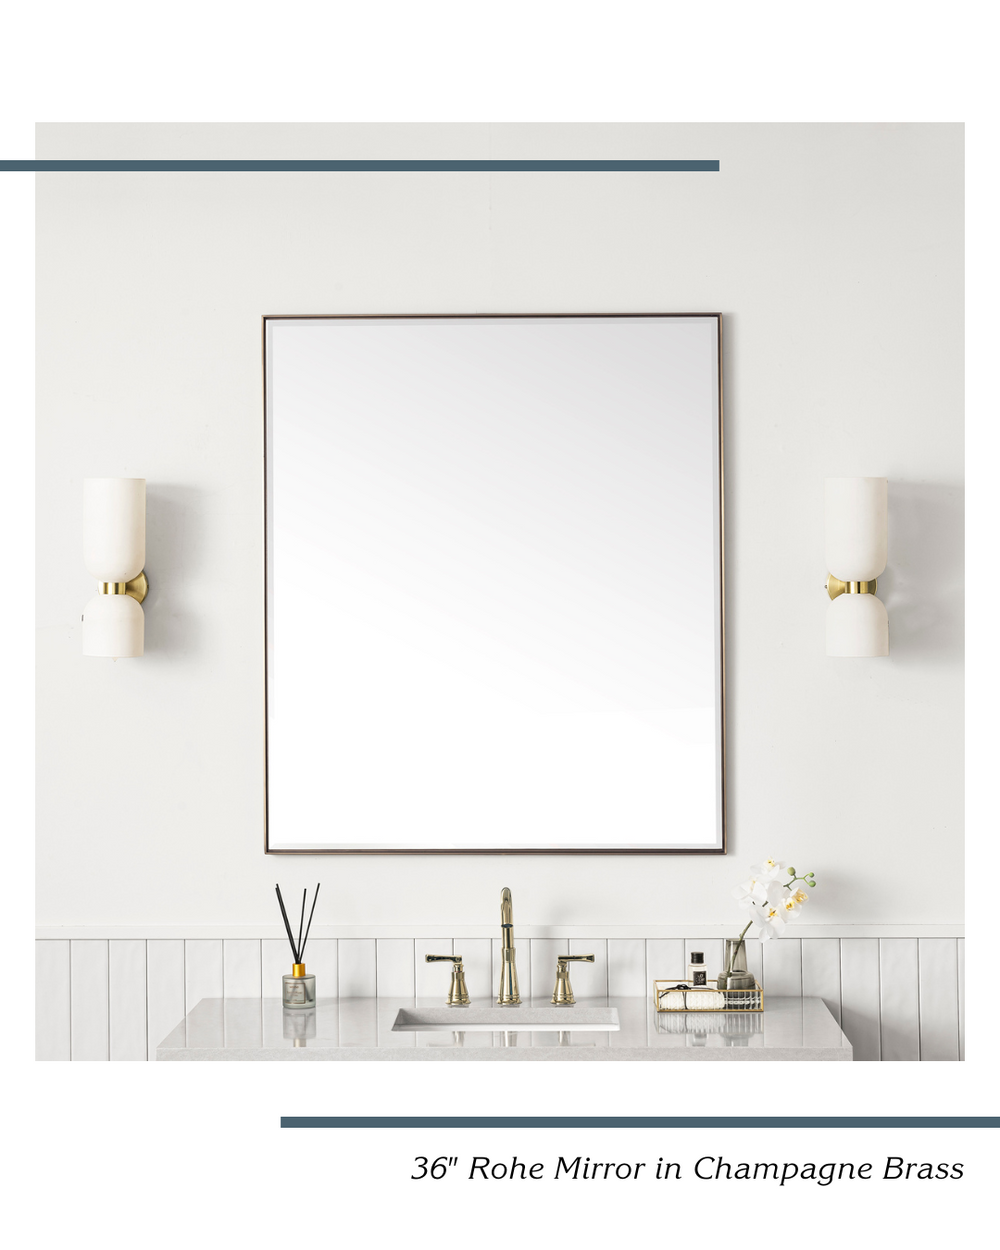 How to Choose the Best Size Mirror